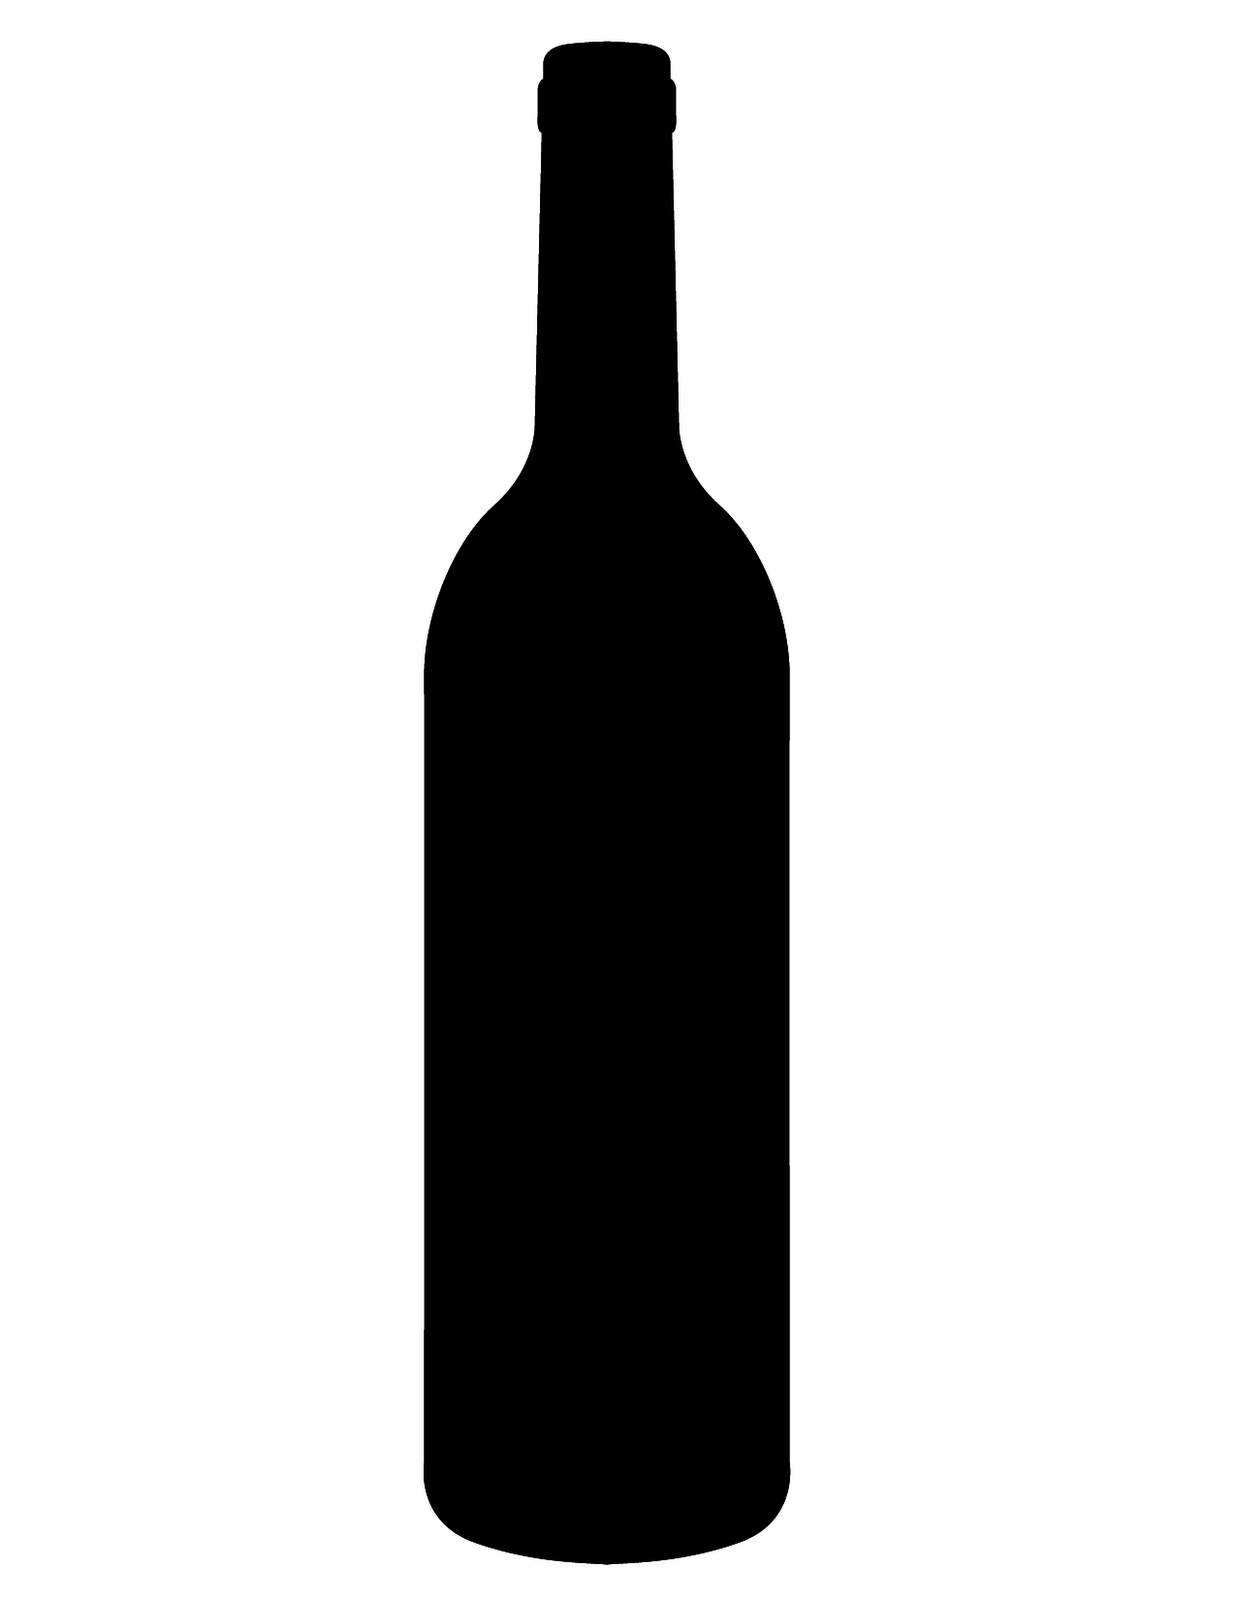 wine bottle silhouette | this is the silhouette of a wine bottle ...